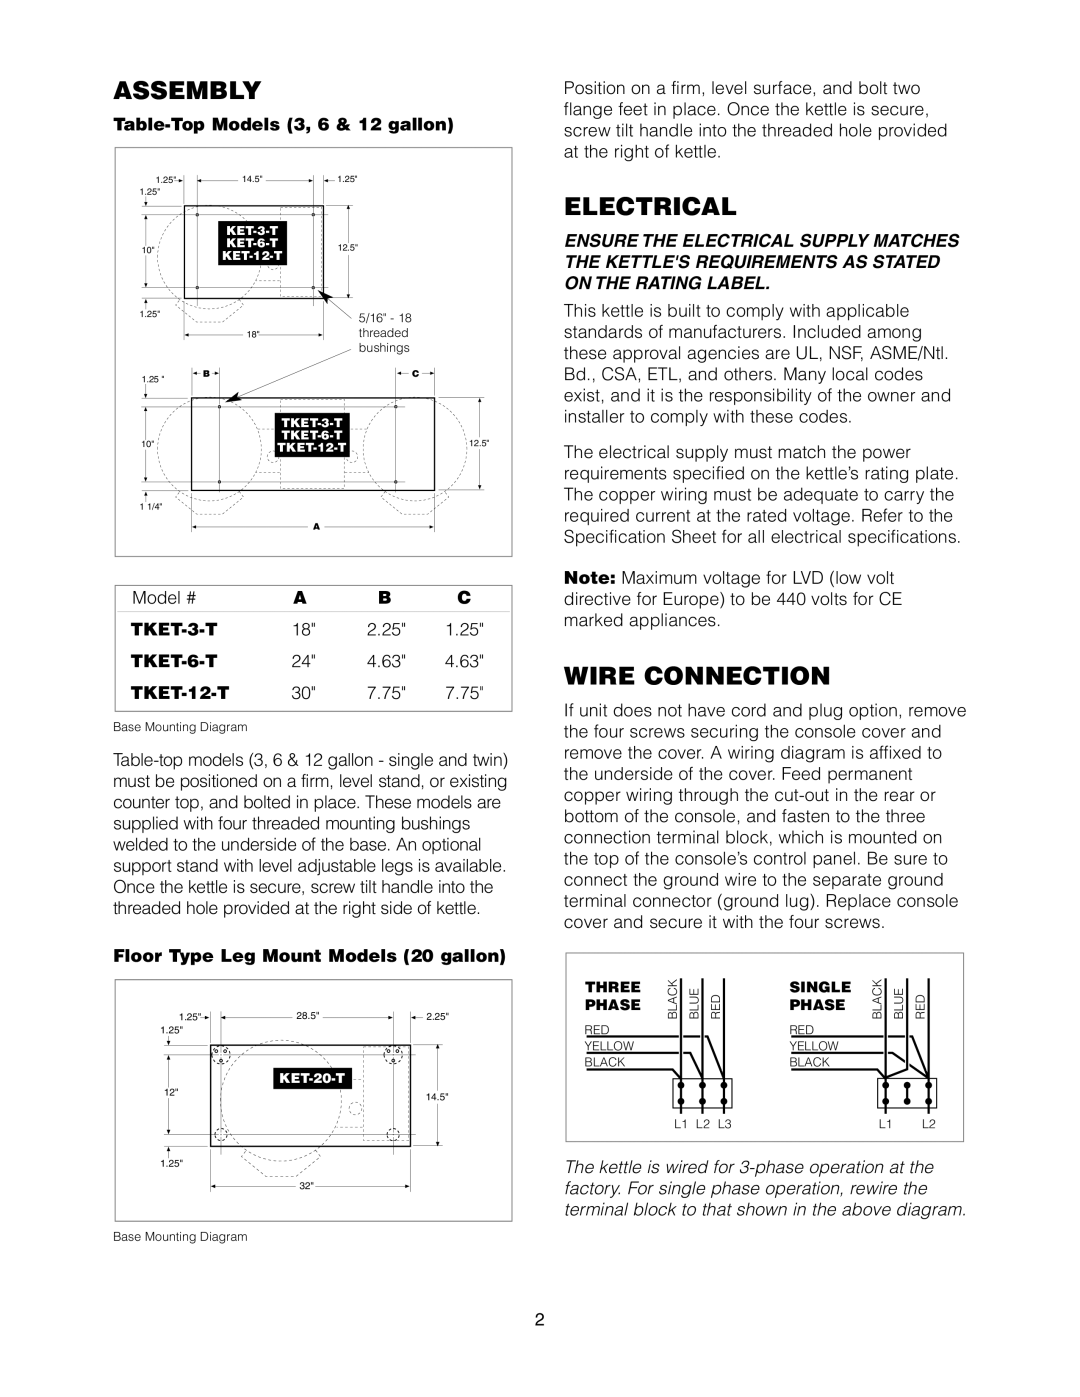 Cleveland Range Assembly, Electrical, Wire Connection, Table-Top Models 3, 6 & 12 gallon, TKET-3-T, TKET-6-T, TKET-12-T 